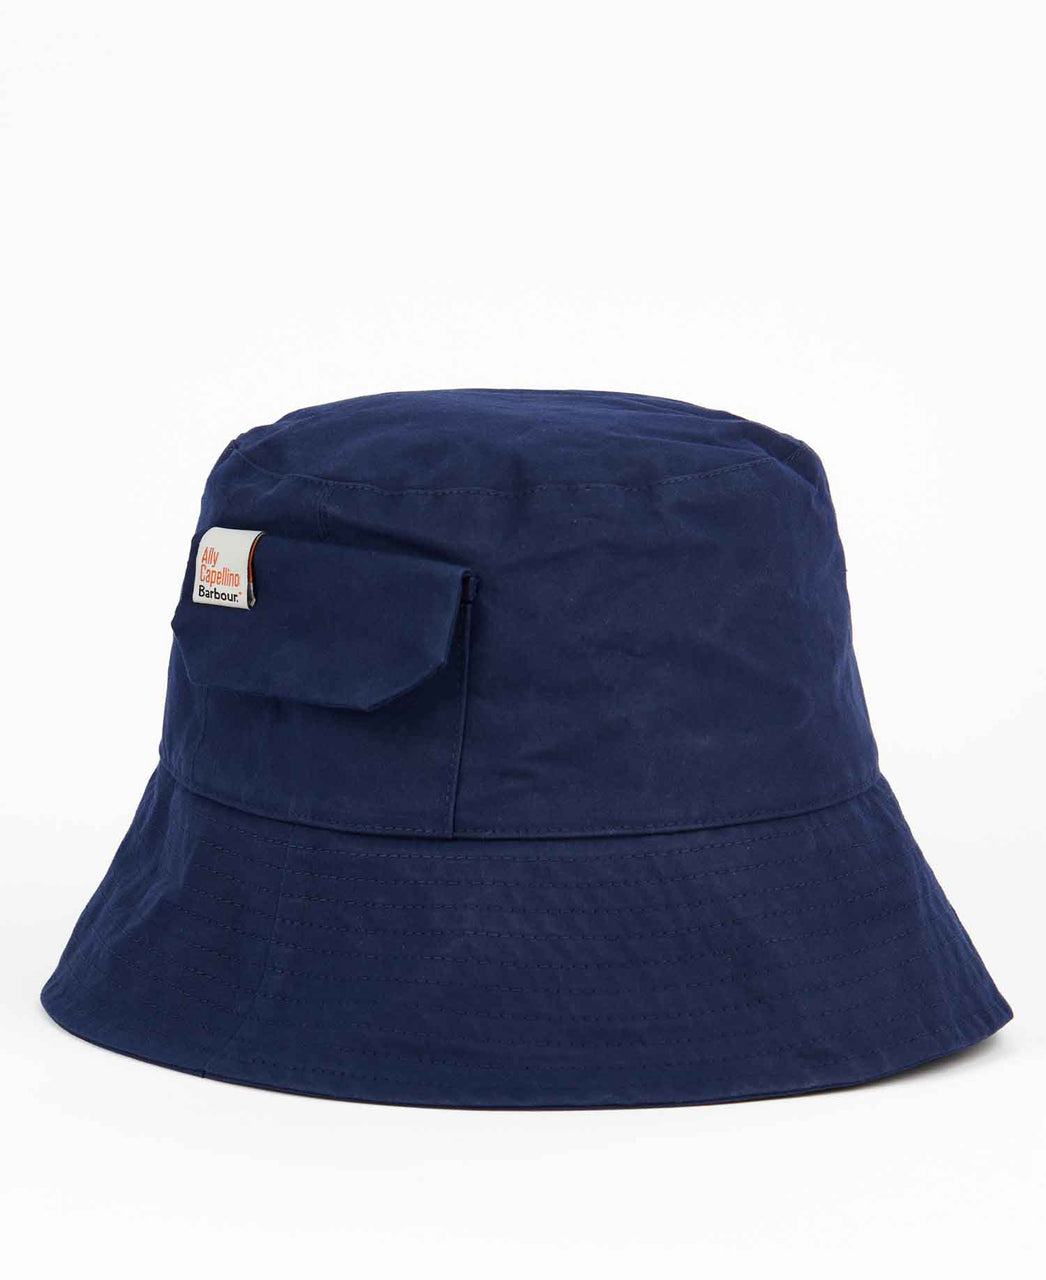 Ally Capellino x Barbour Sweep Waxed Cotton Sports Hat in Navy